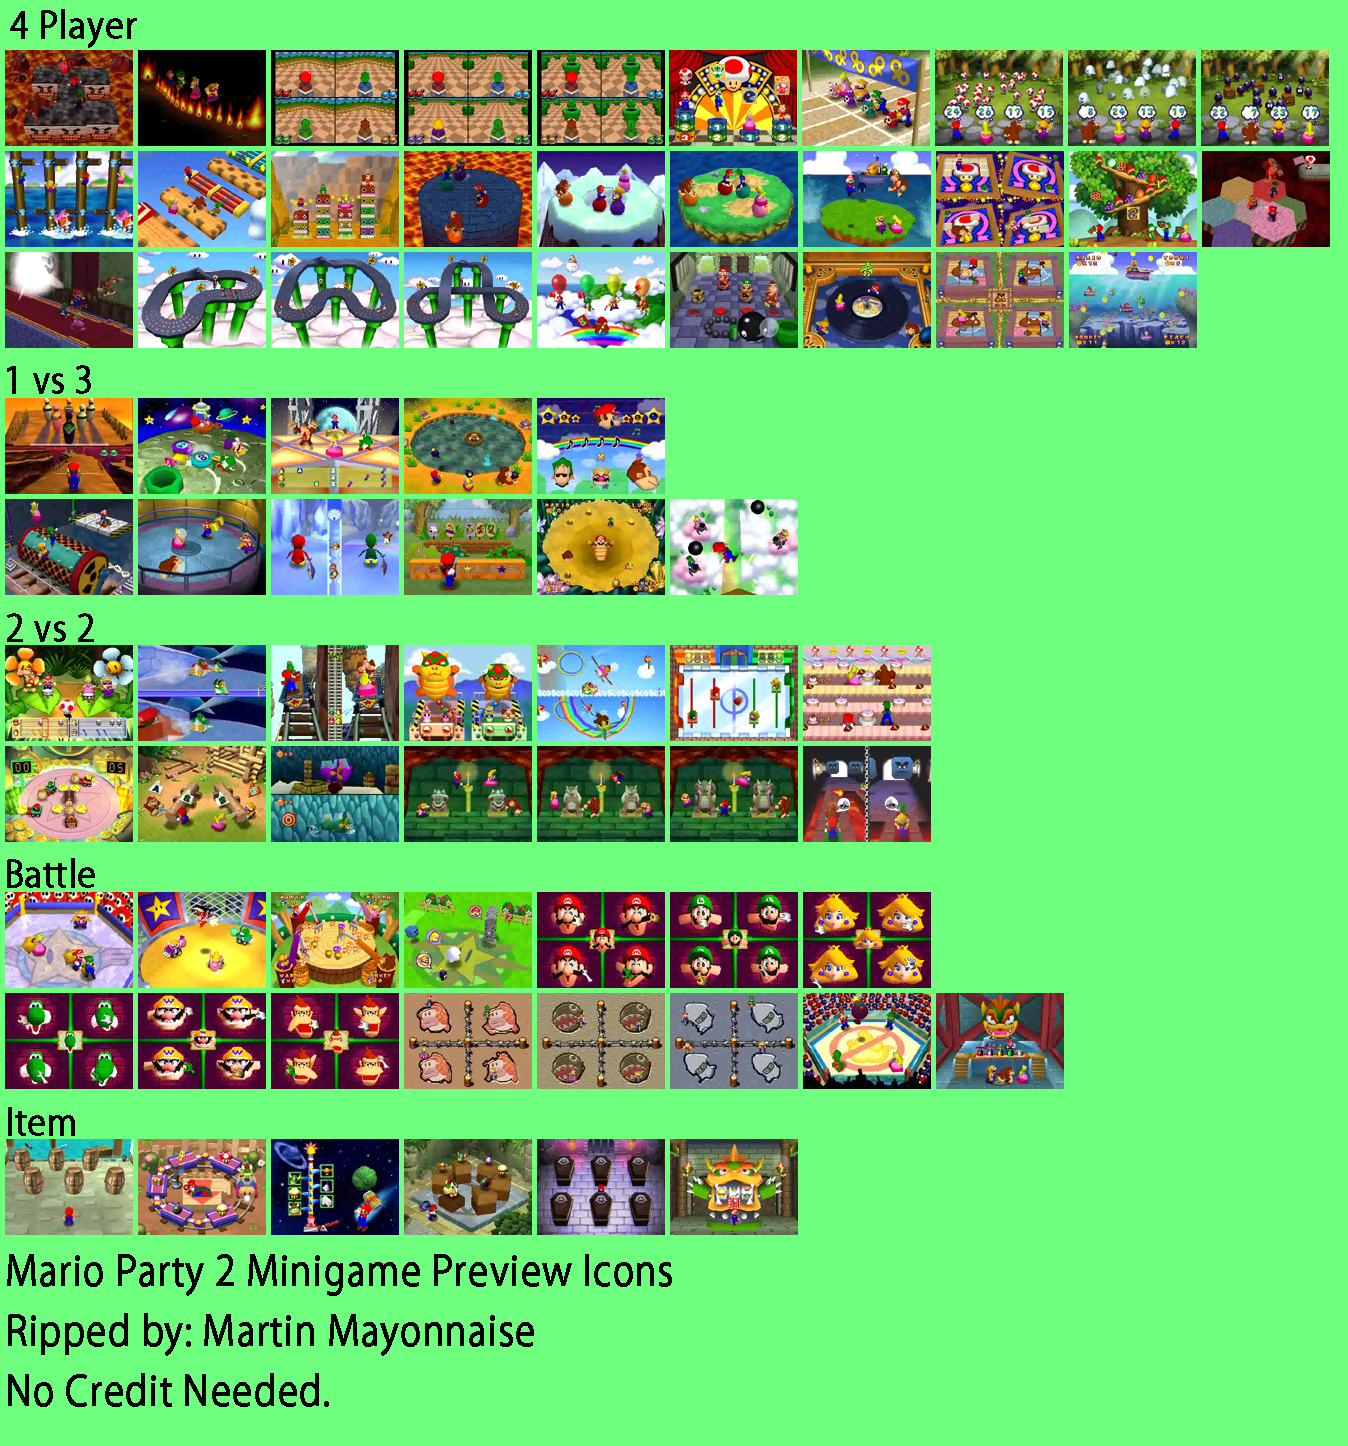 Mario Party 2 - Minigame Preview Icons